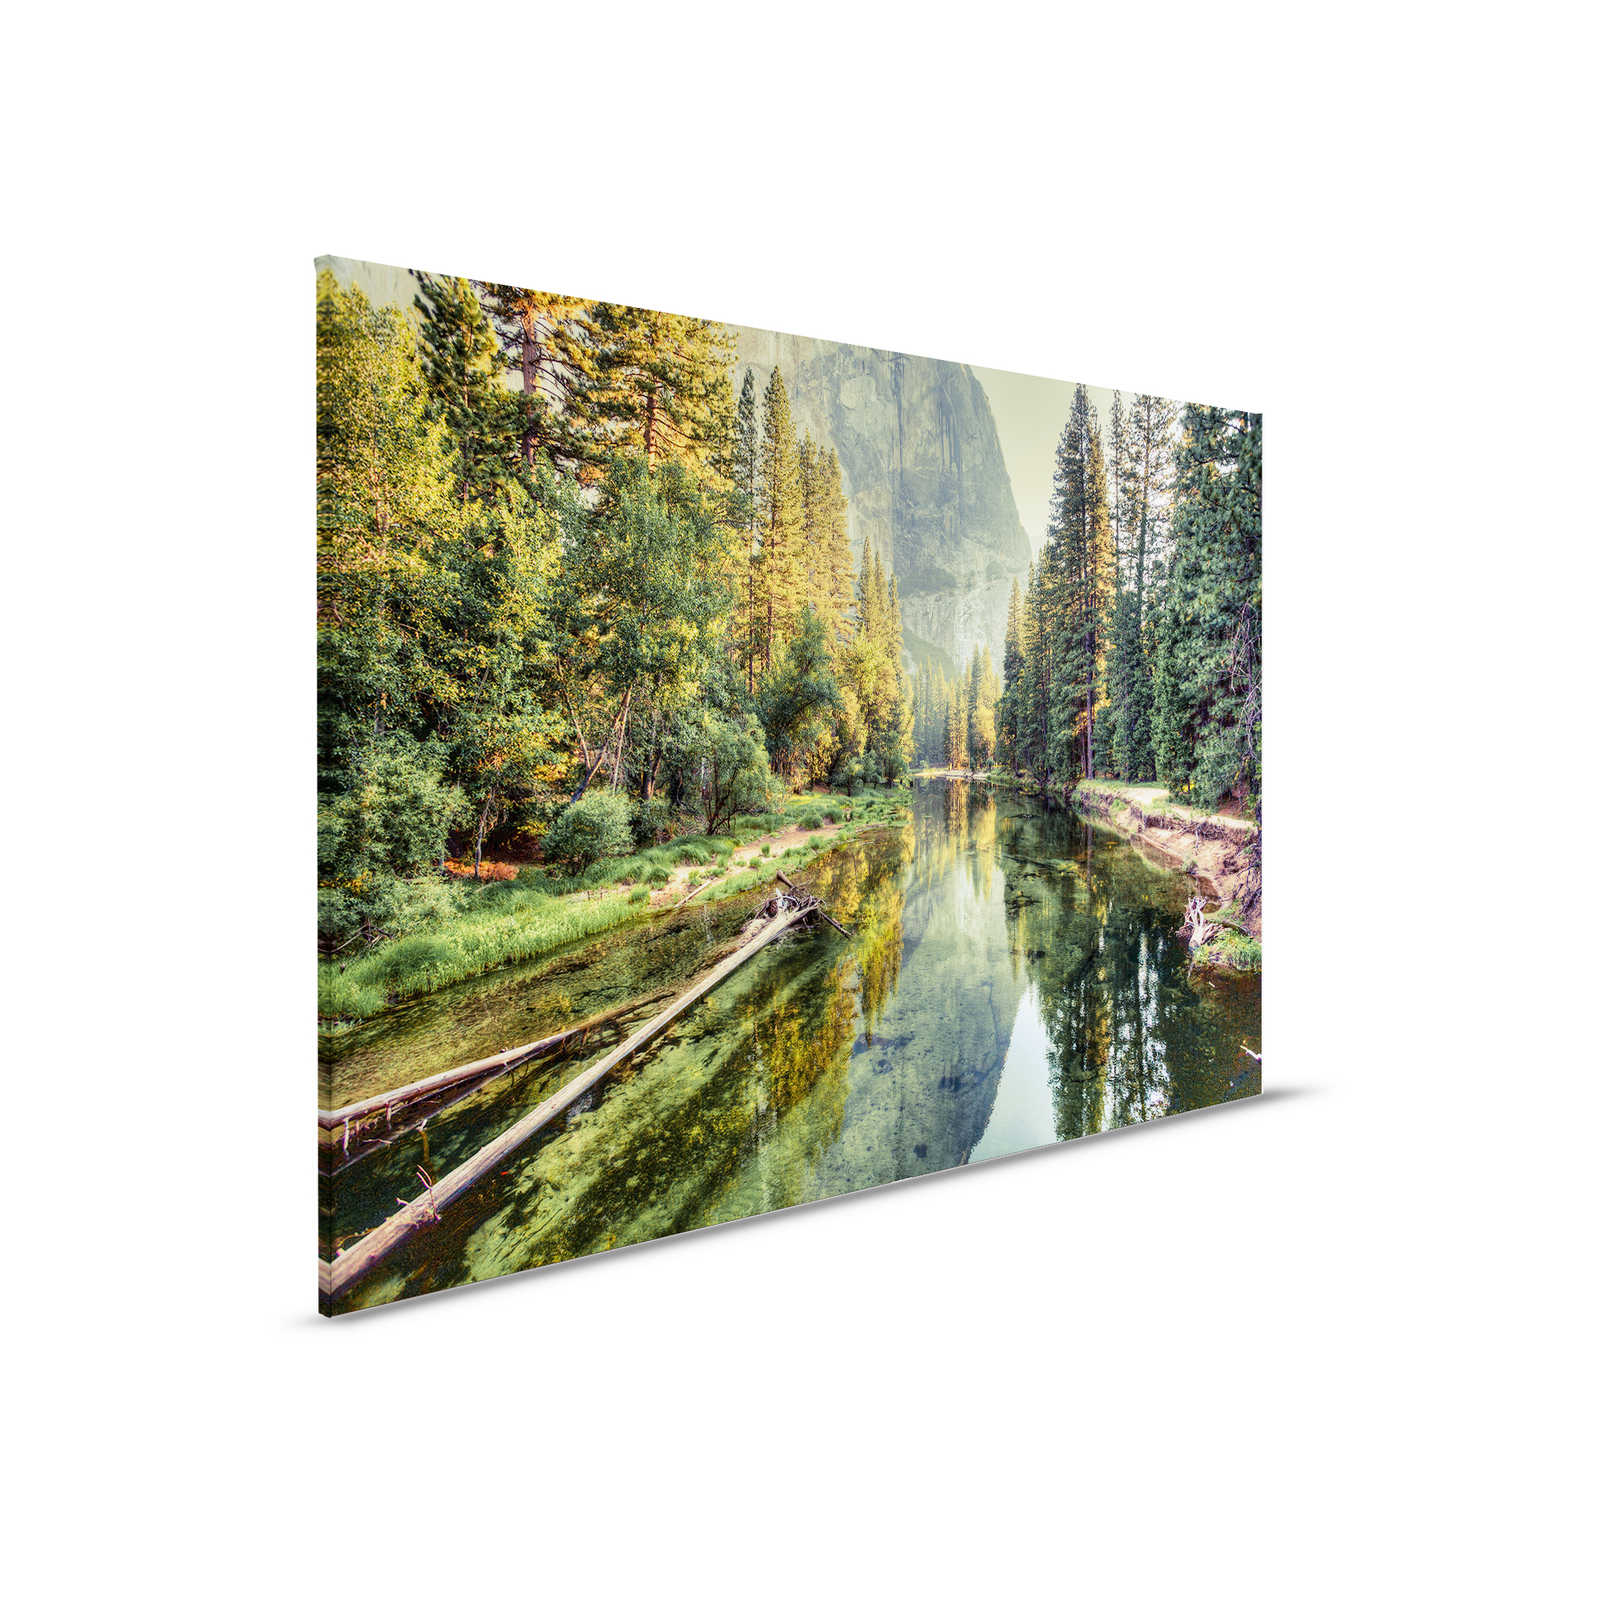         Canvas with river at the foot of a mountain - 0.90 m x 0.60 m
    